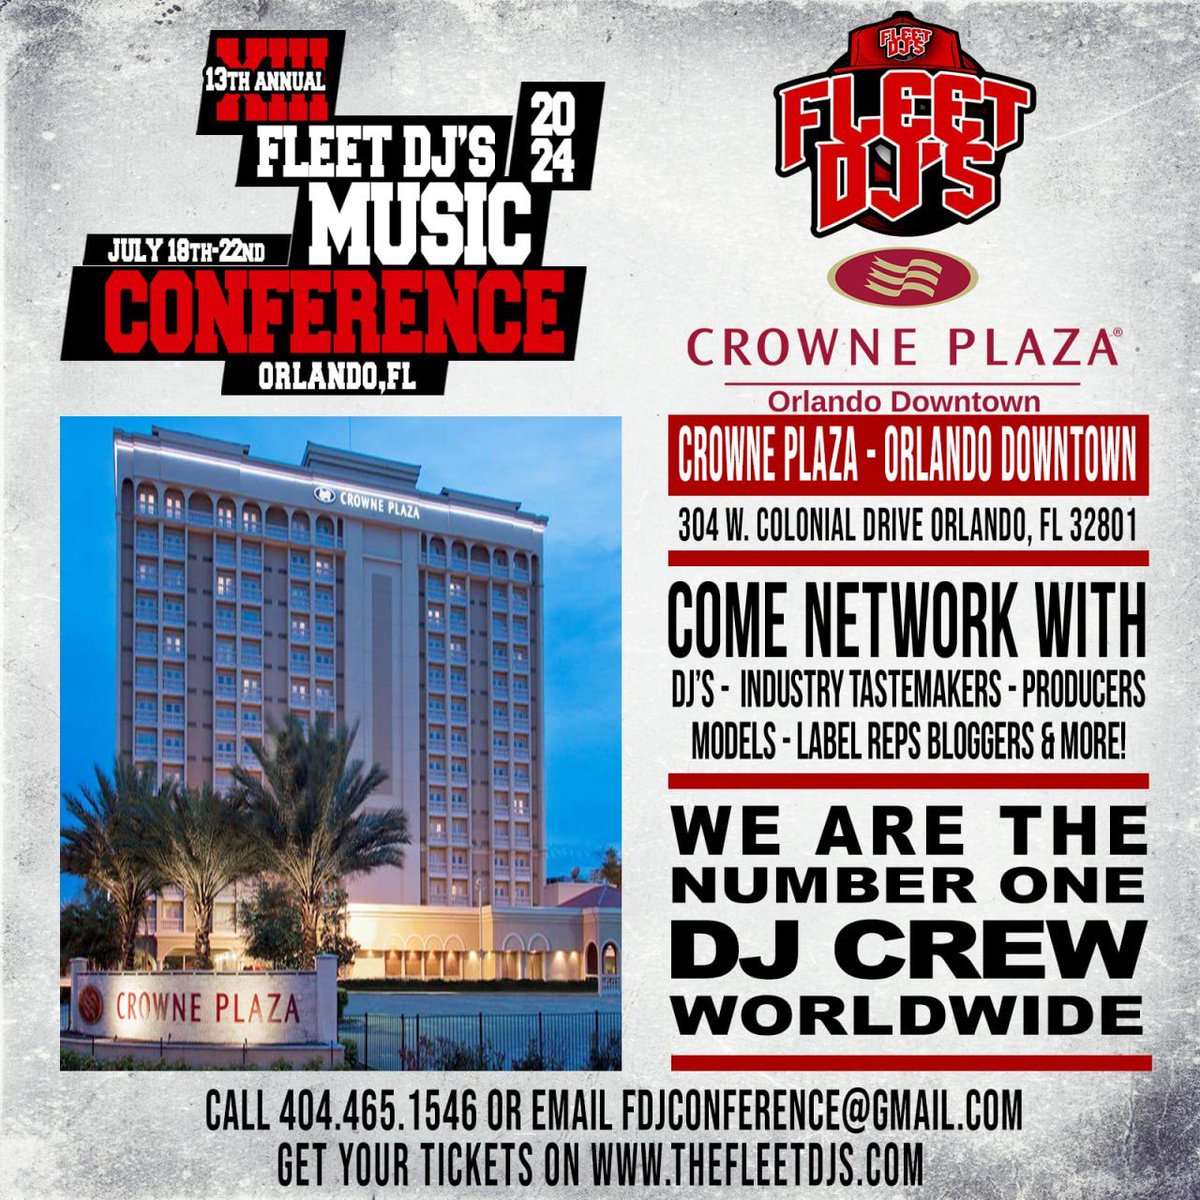 🎧 @Fleetdjs 13th annual Music Conference @fleetdjmusicconference July 18th - 22nd in Orlando, Florida 💥 Be in the building! 💥  I will be there... Along with all the Fleet DJs!! This is THE industry event of the year, all the major players in music in 1 place! 🔥🔥 For more